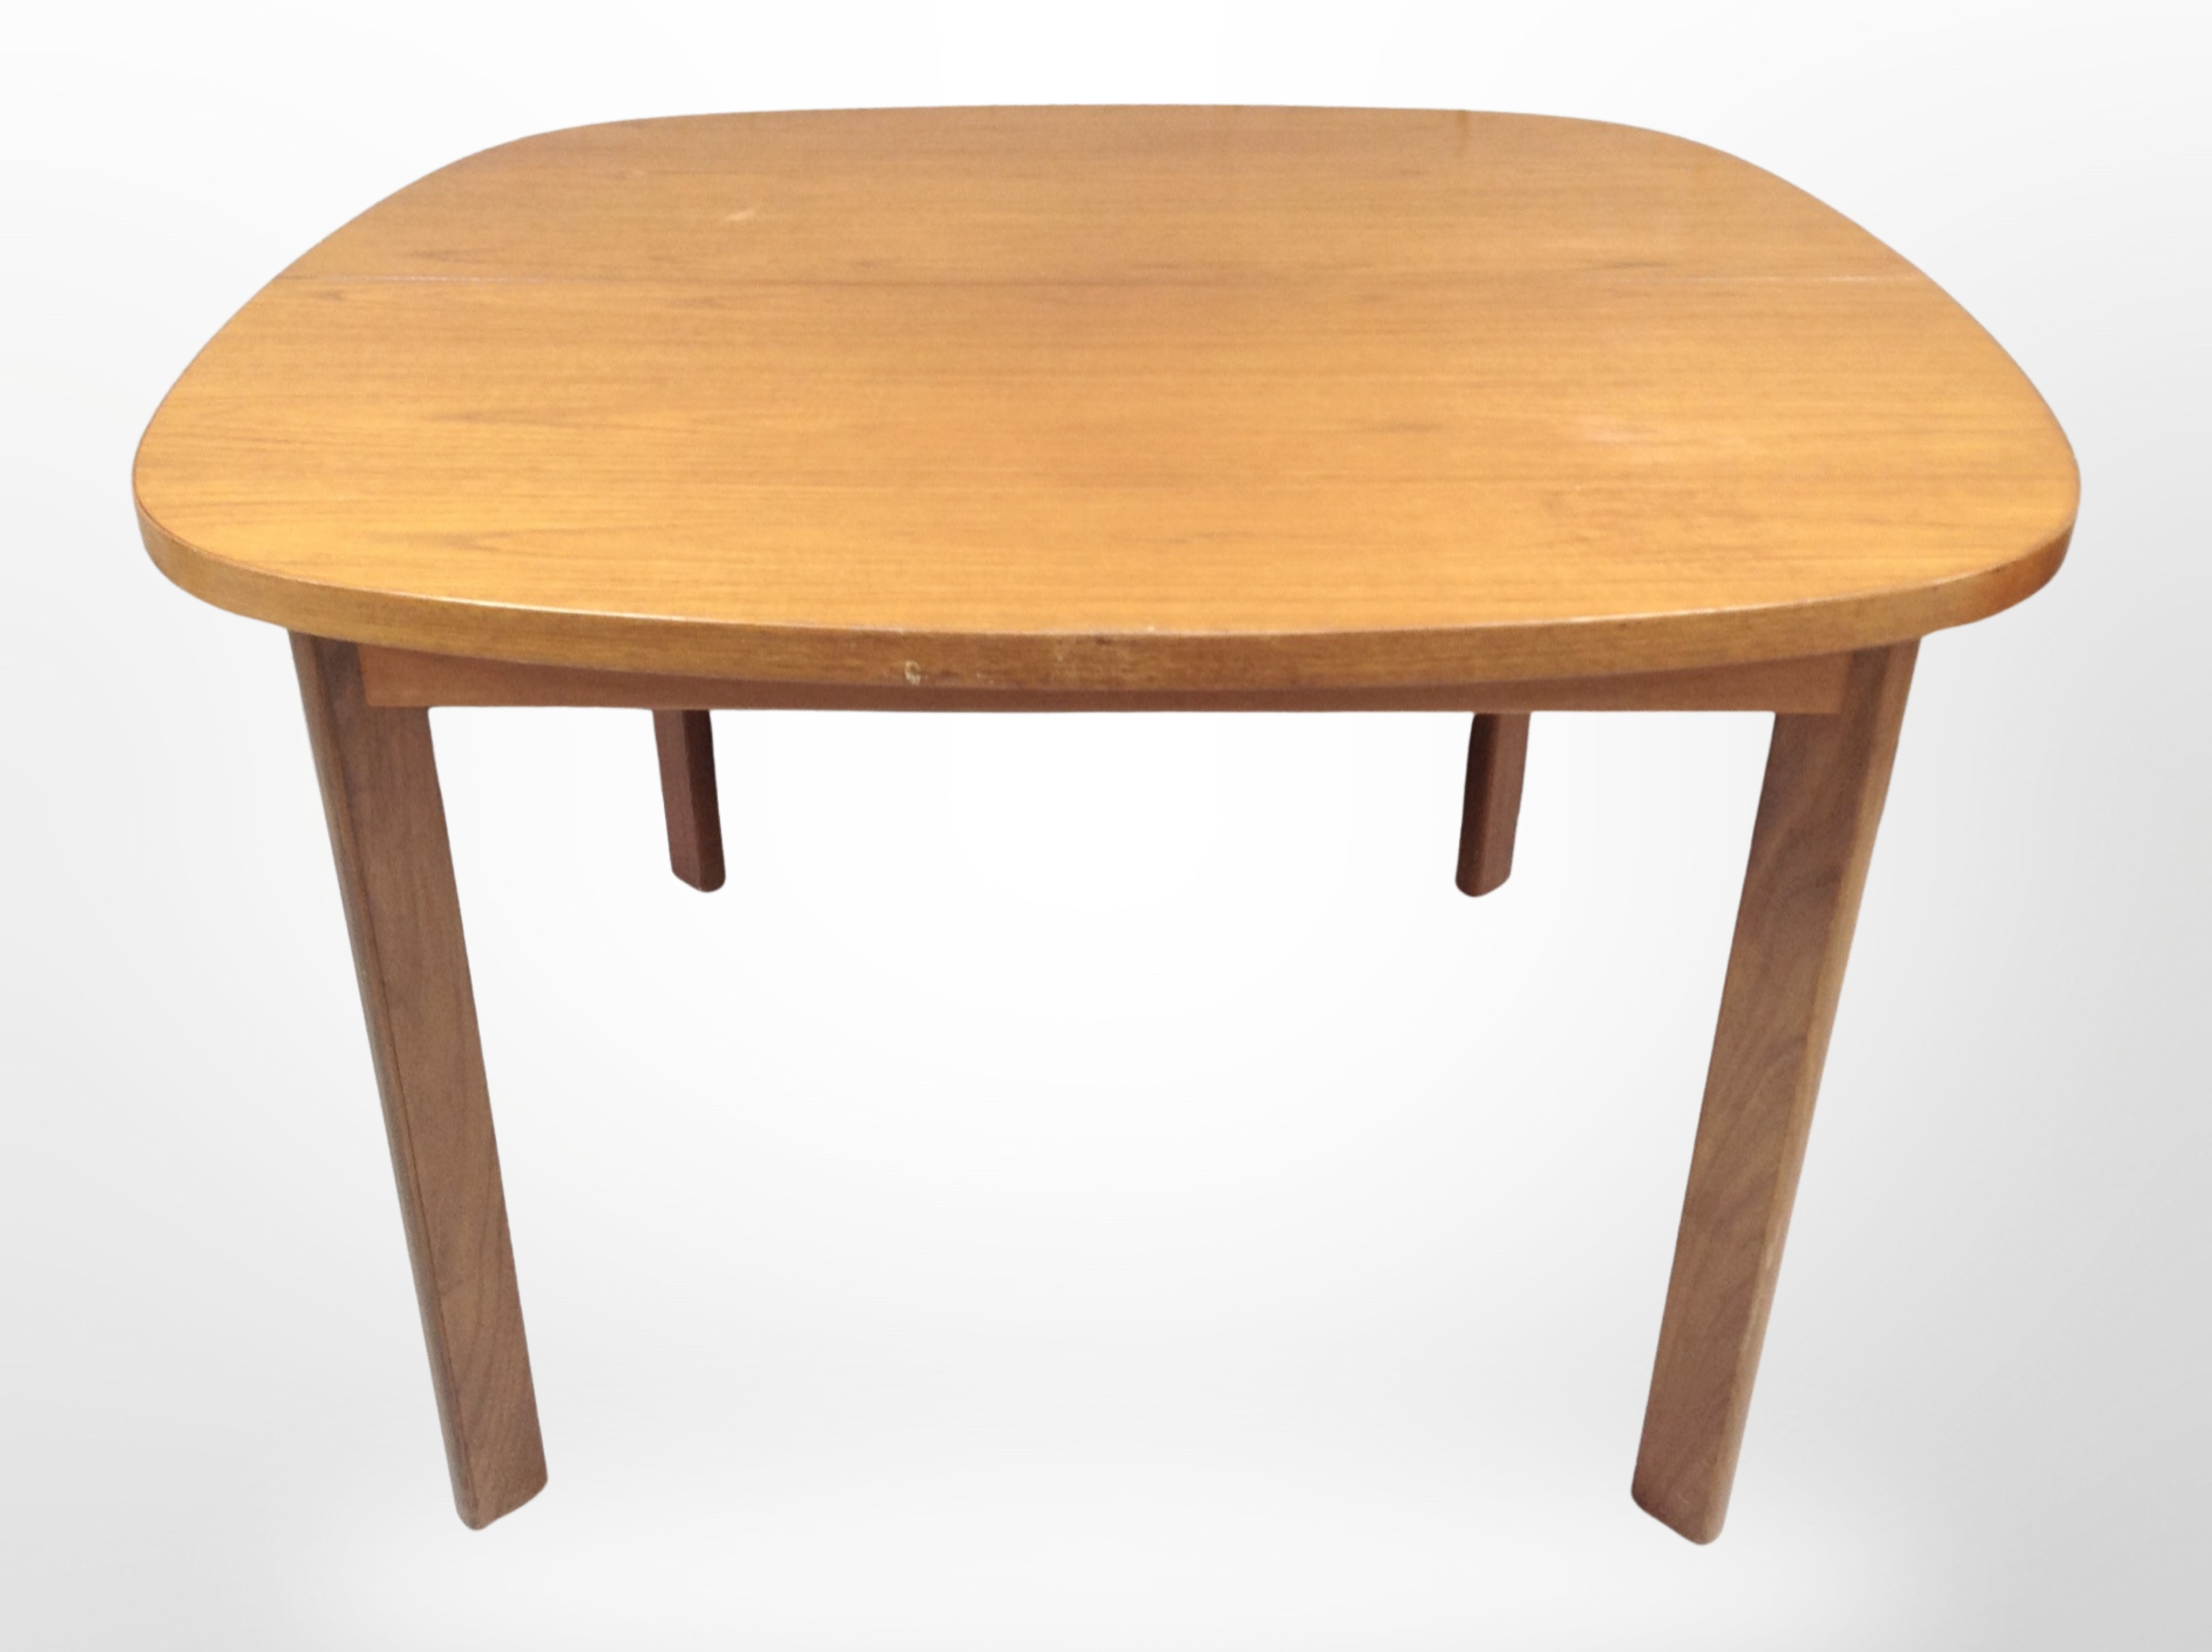 A G-Plan teak extending dining table with leaf, length 112cm (unextended), - Image 4 of 4